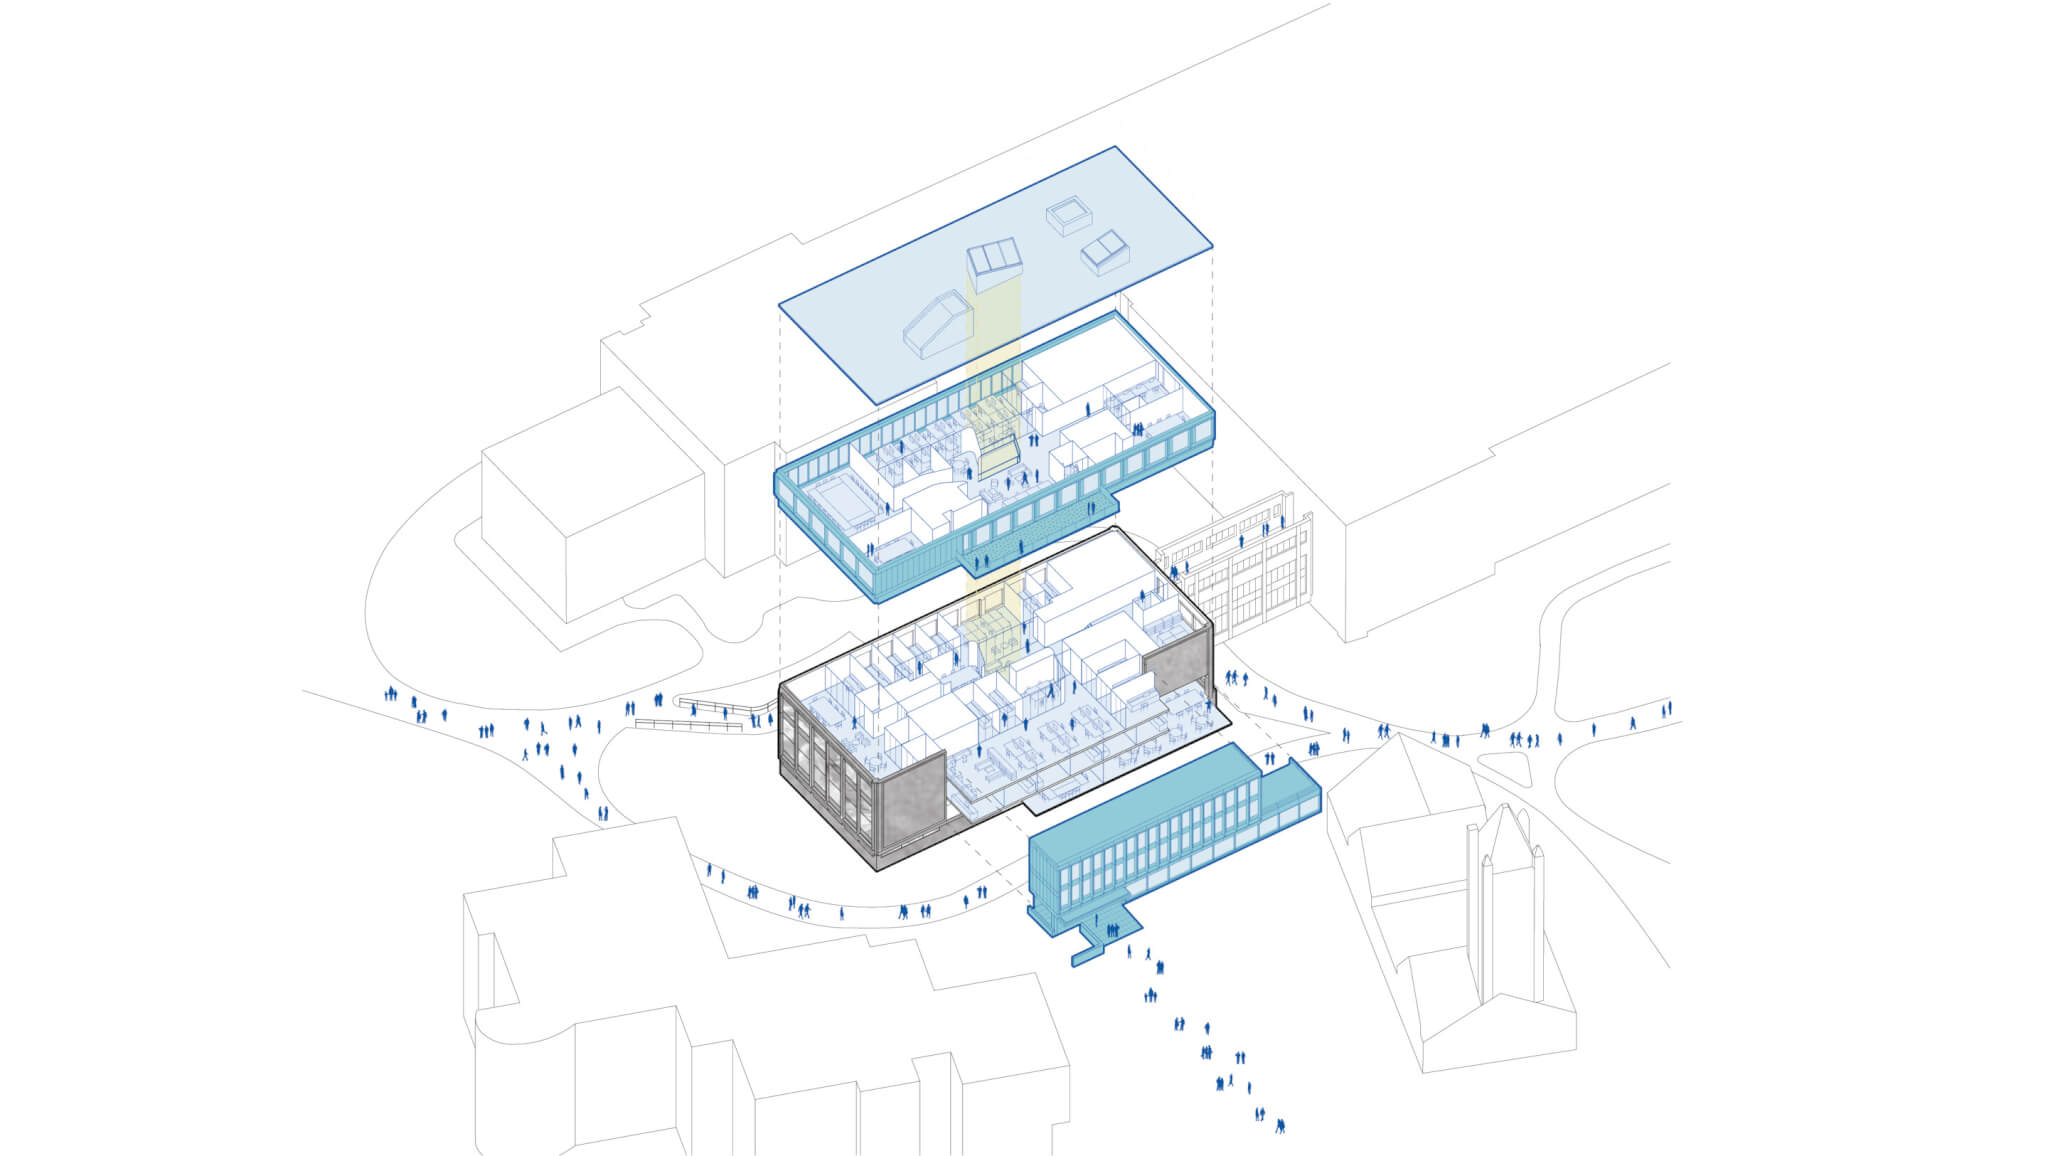 exploded axonometric showing circulation in an academic building